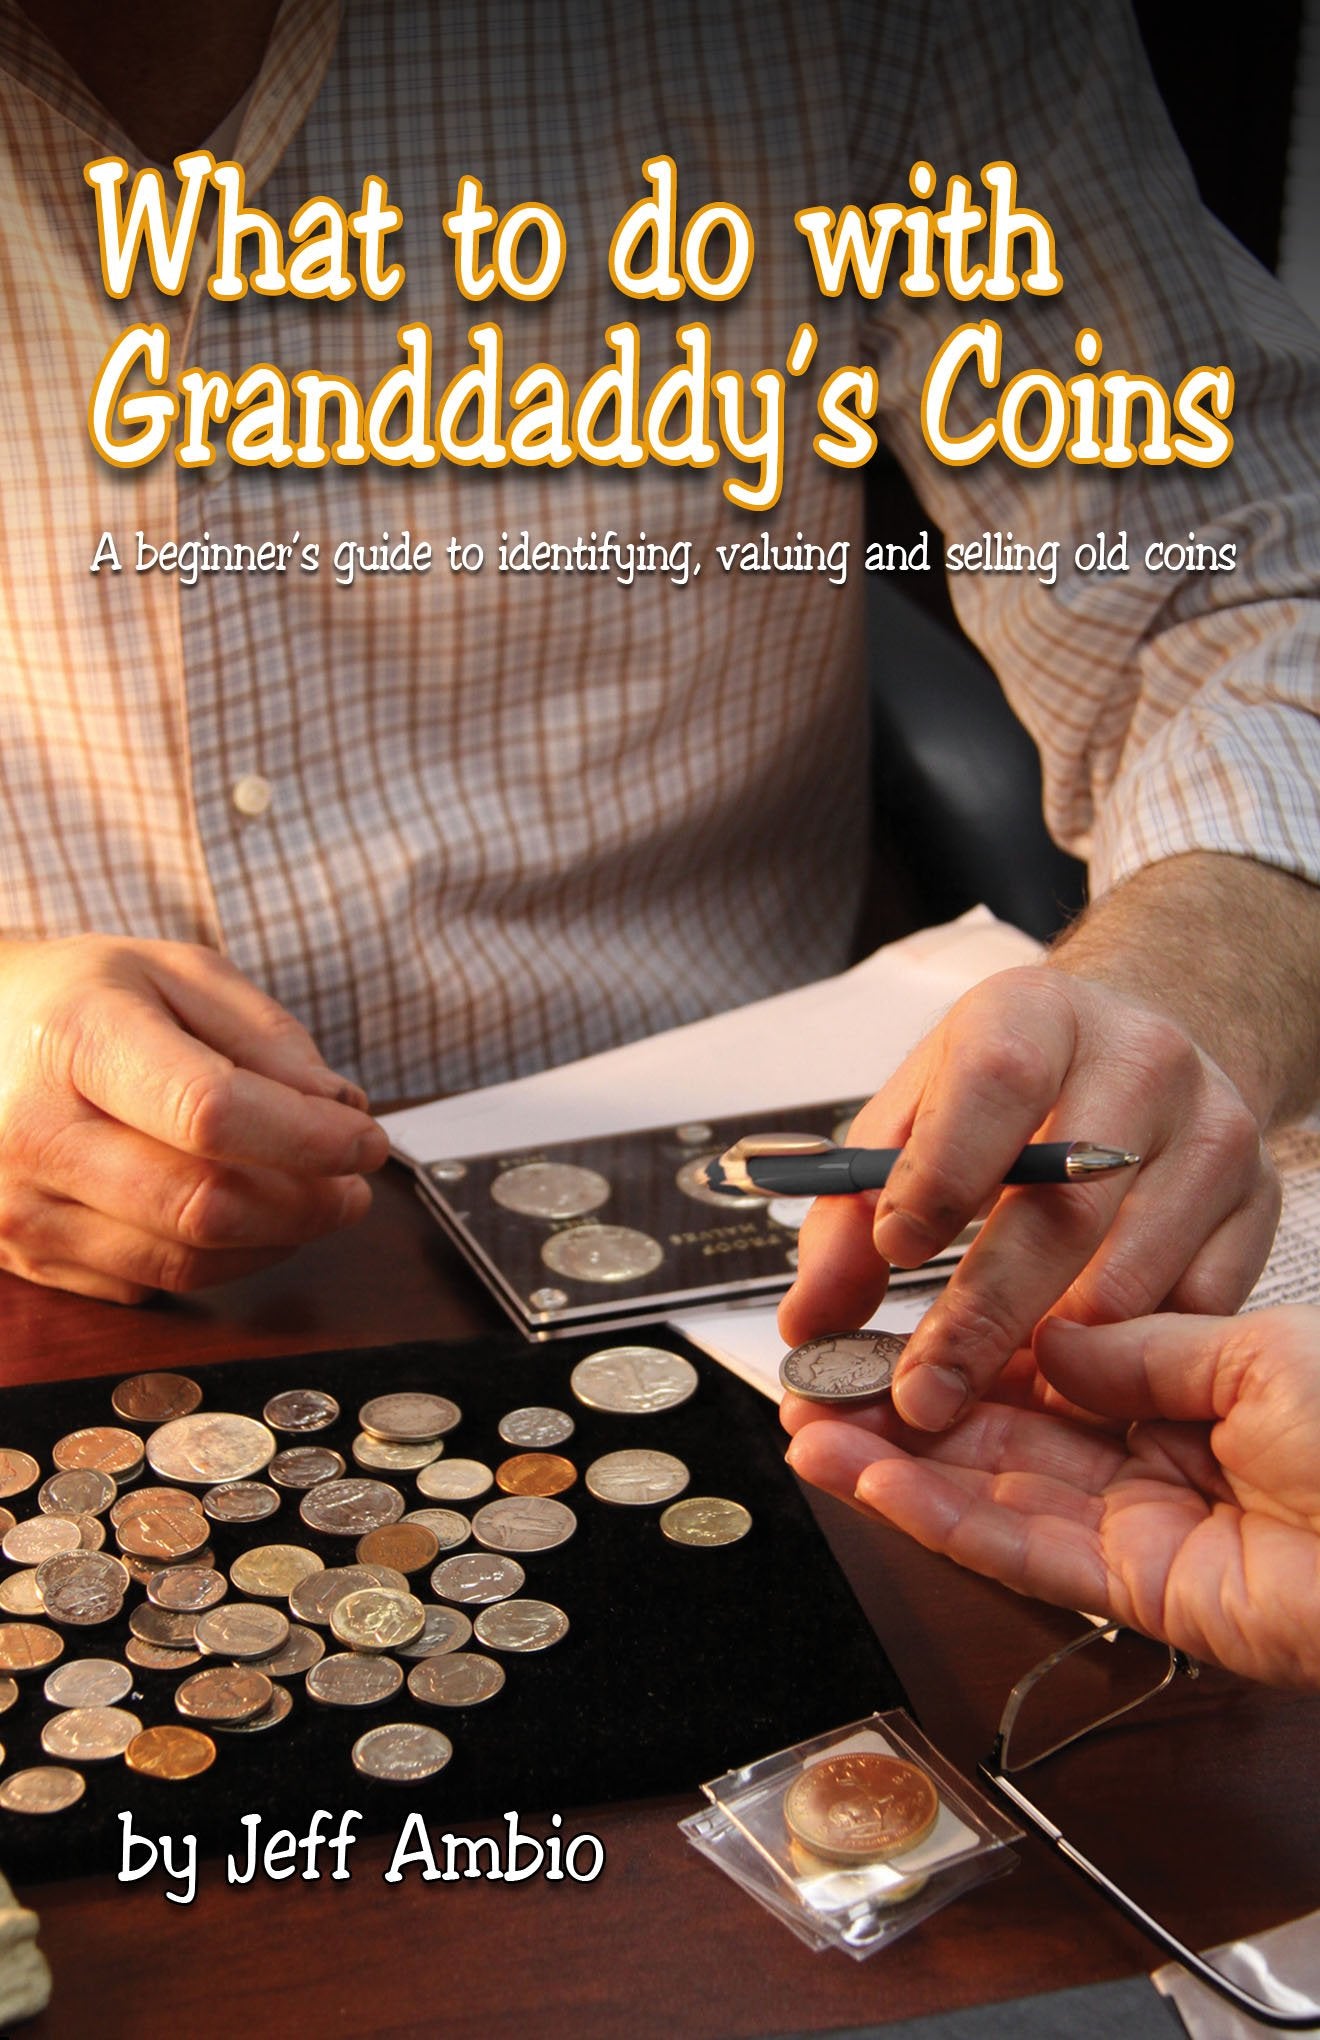 What to do with Granddaddy's Coins Book - CLOSEOUT